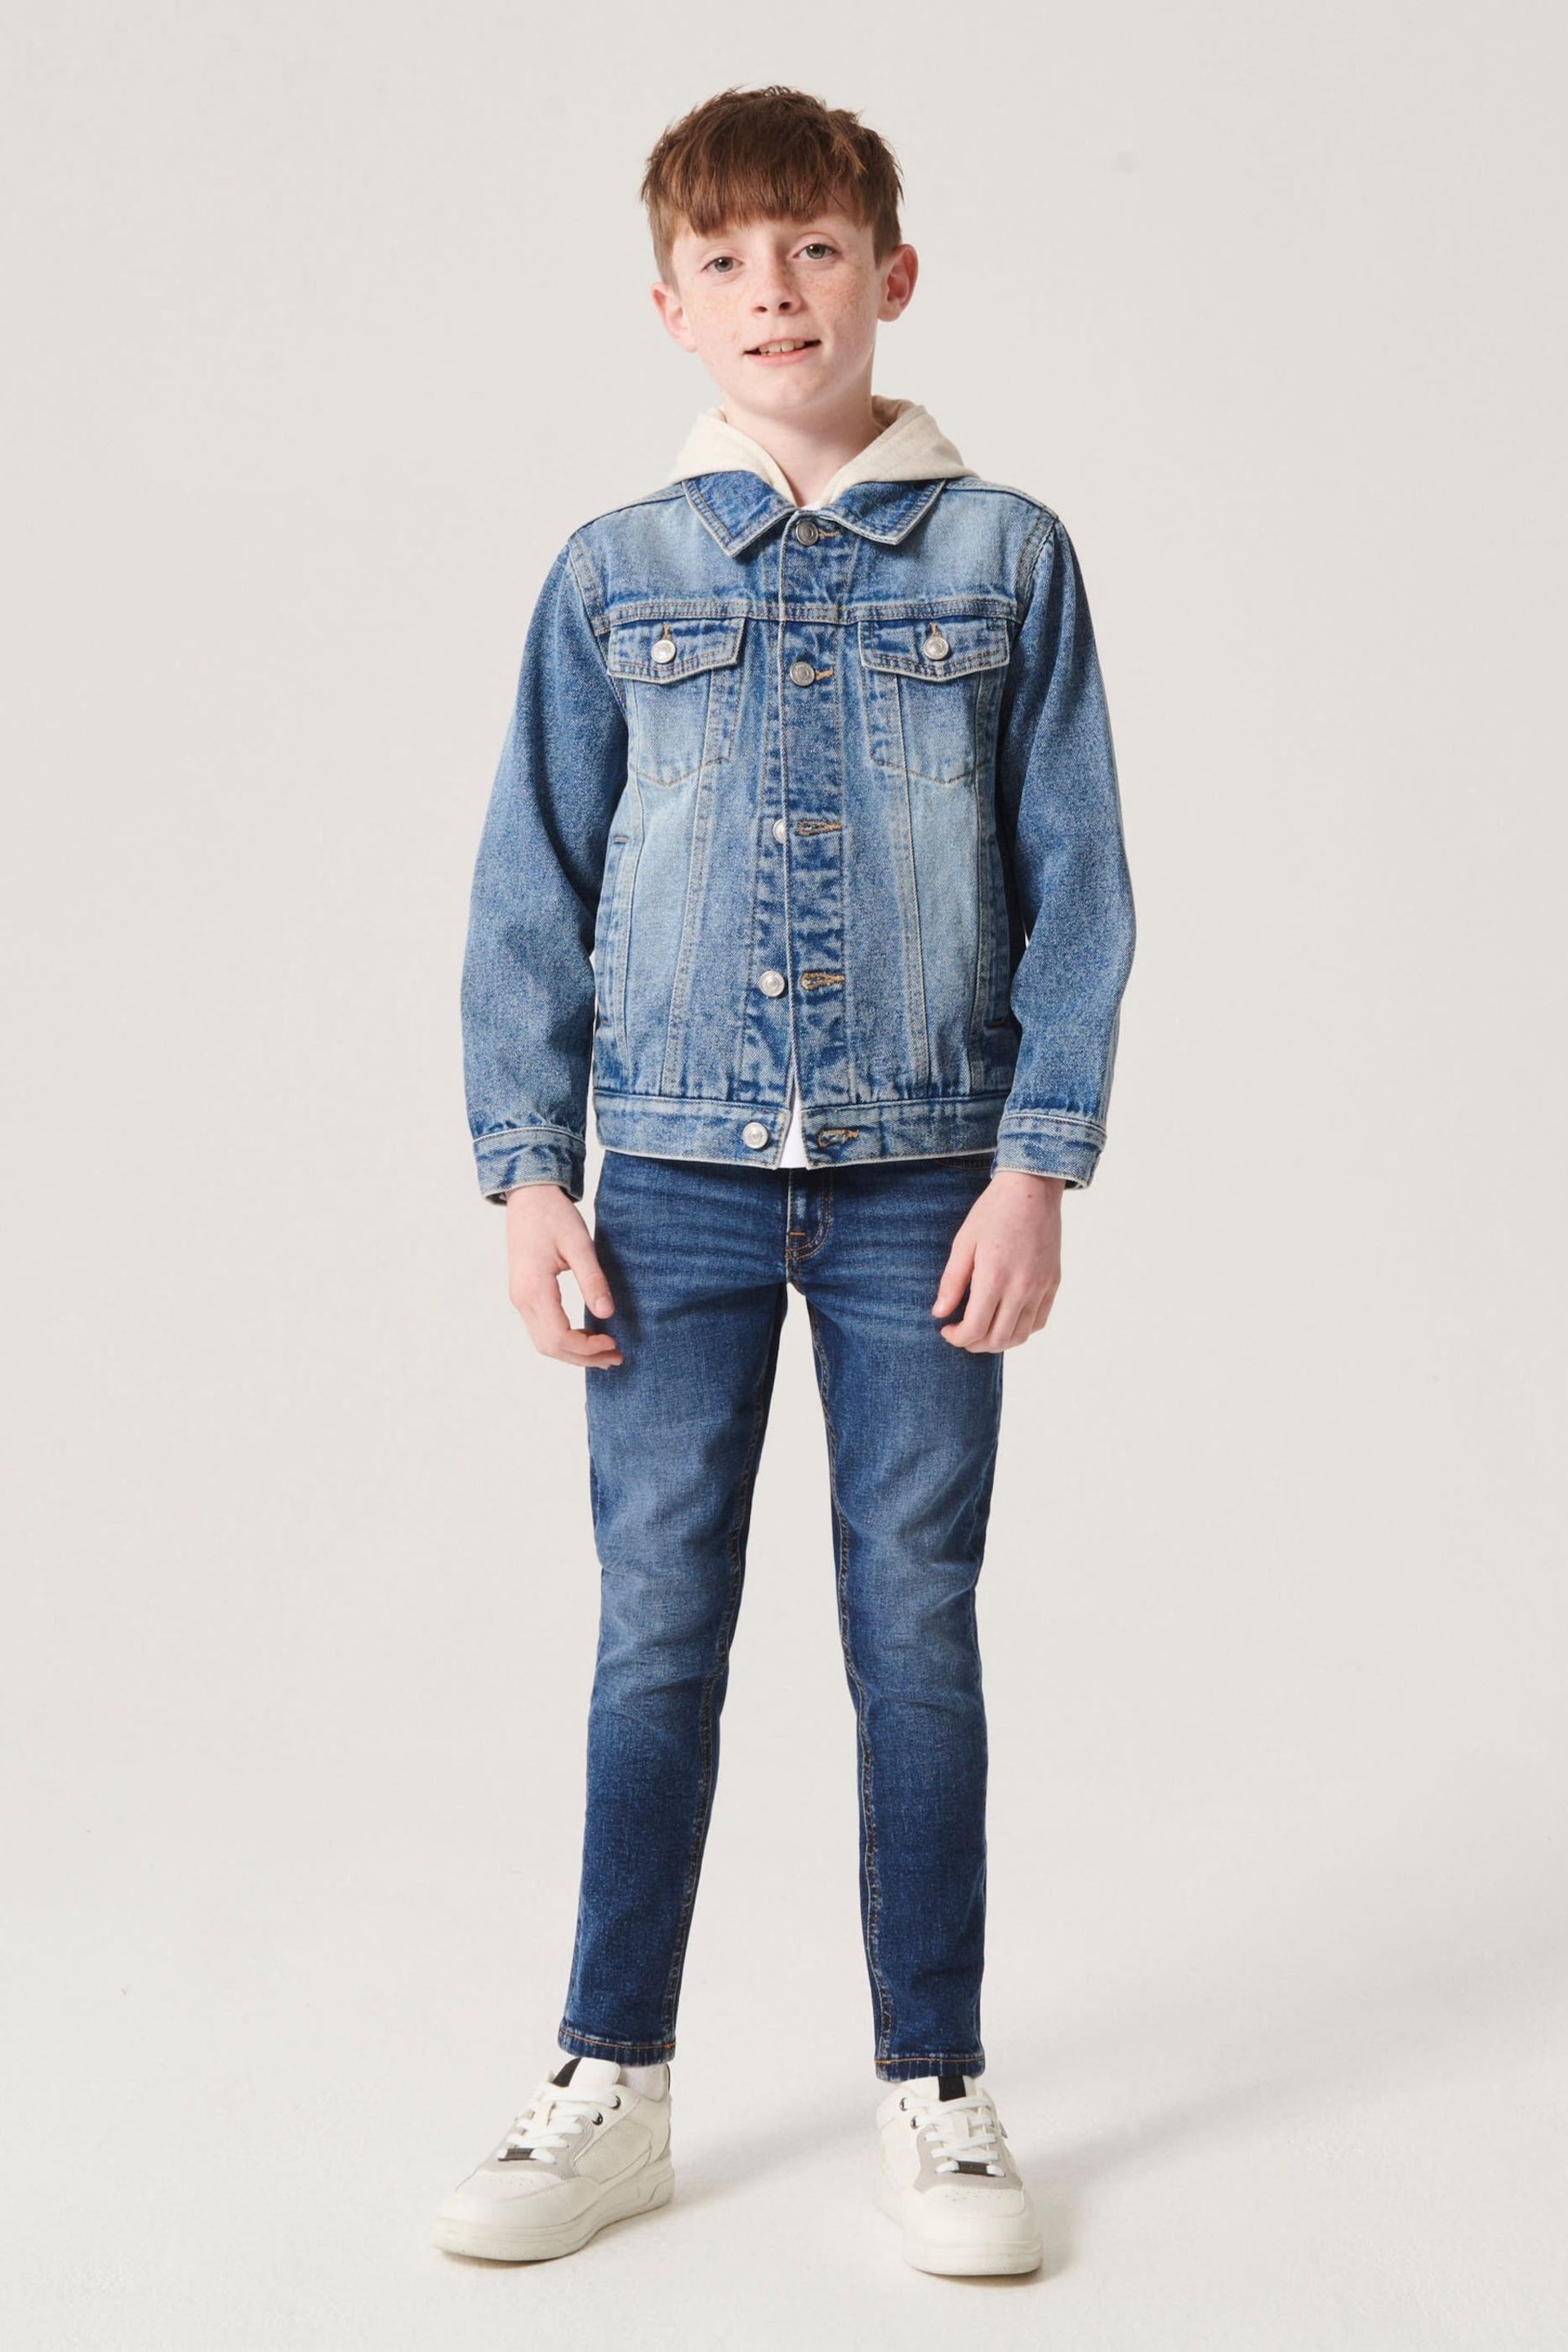 River Island Blue Slim Relaxed Jeans - Image 1 of 4